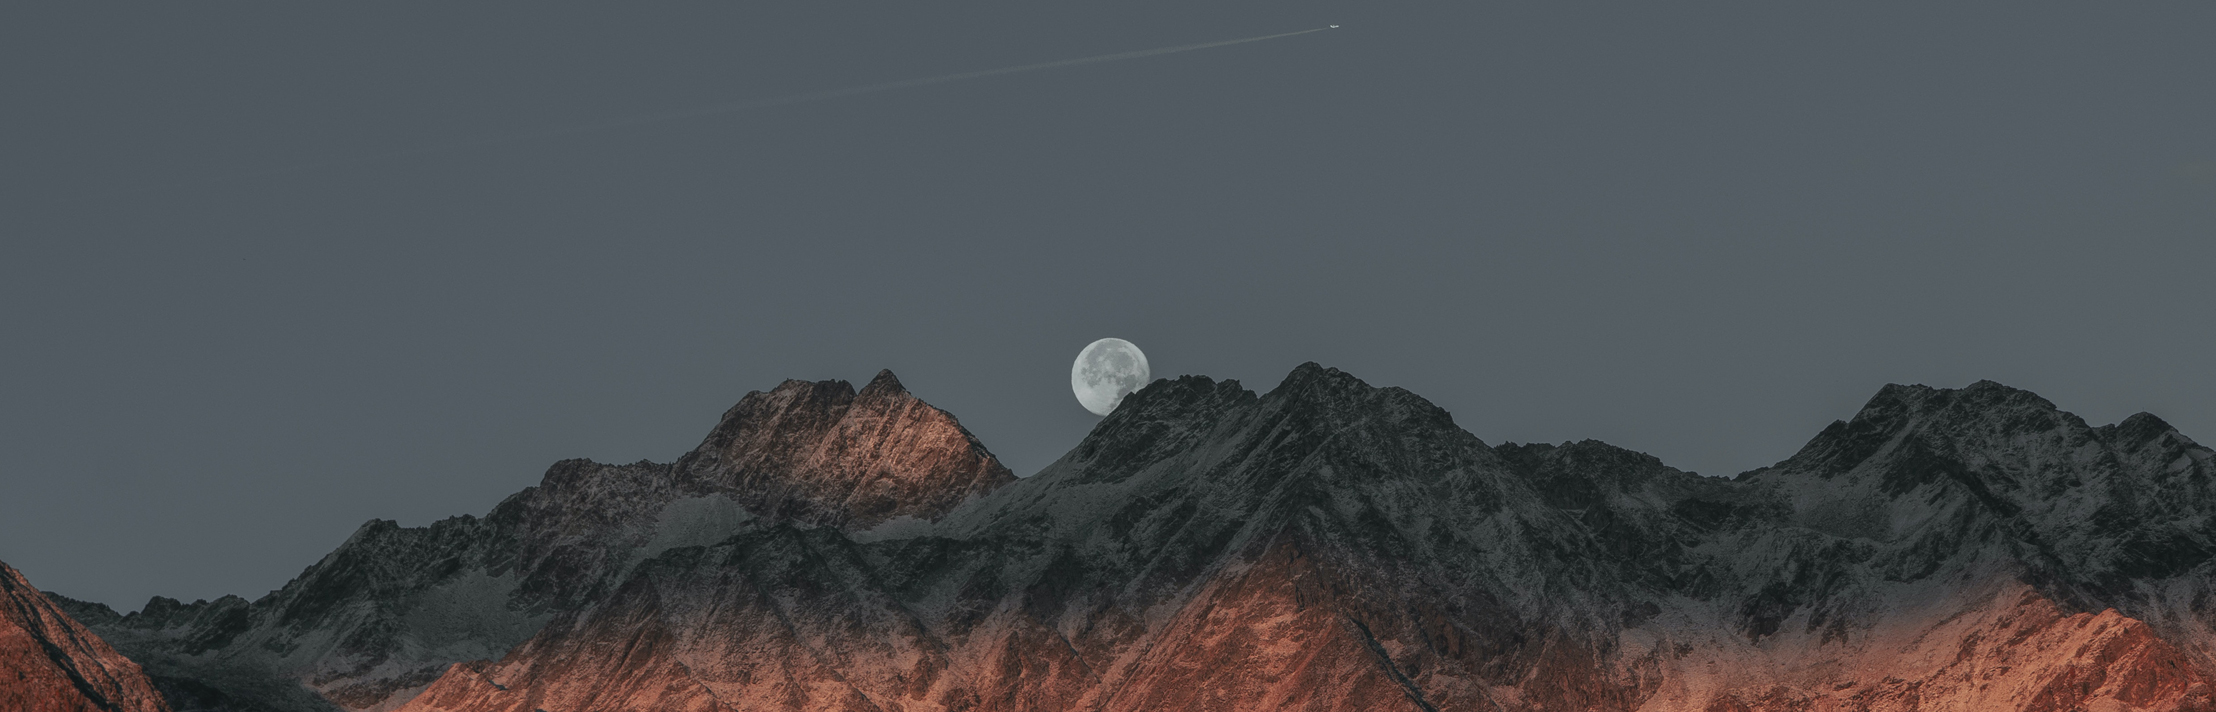 Picture of a mountain range summit with a full moon in the background